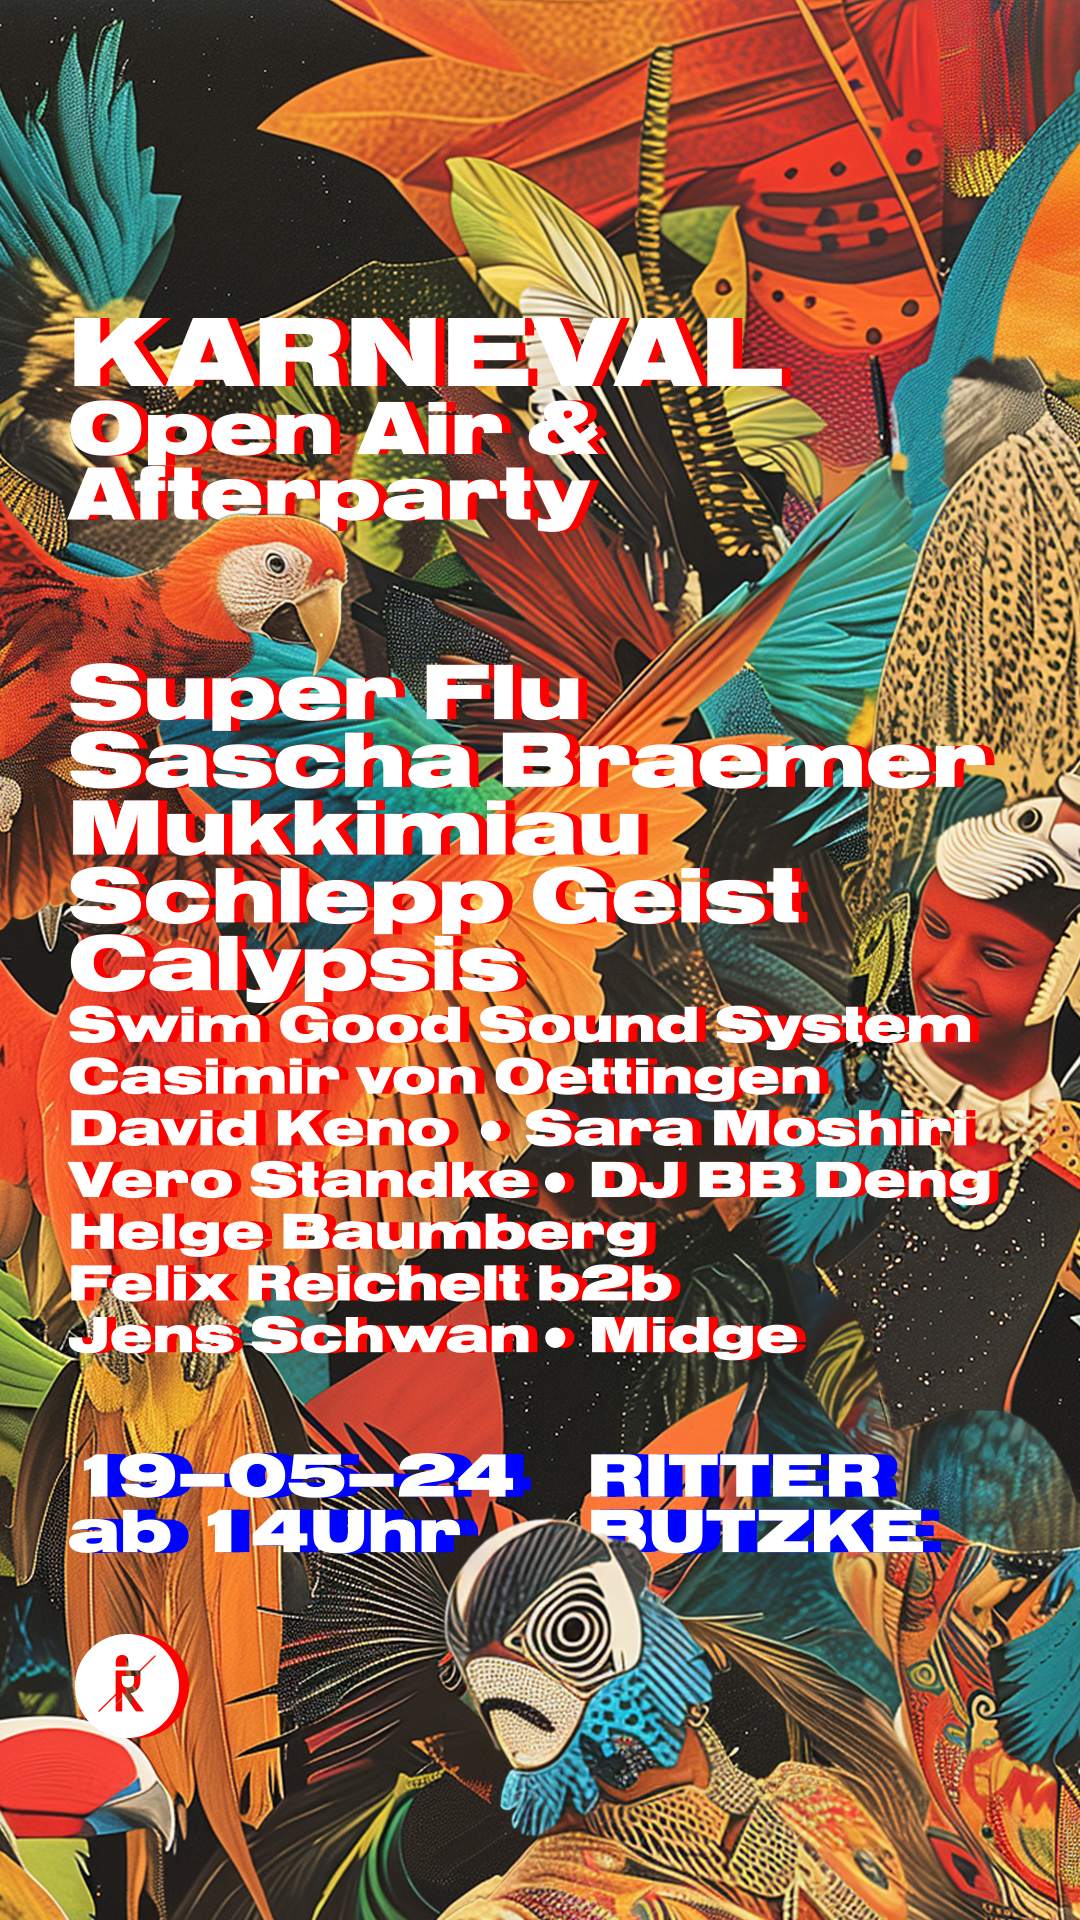 Karneval Open Air & Afterparty w/ Super Flu // free entry all night long - Página trasera